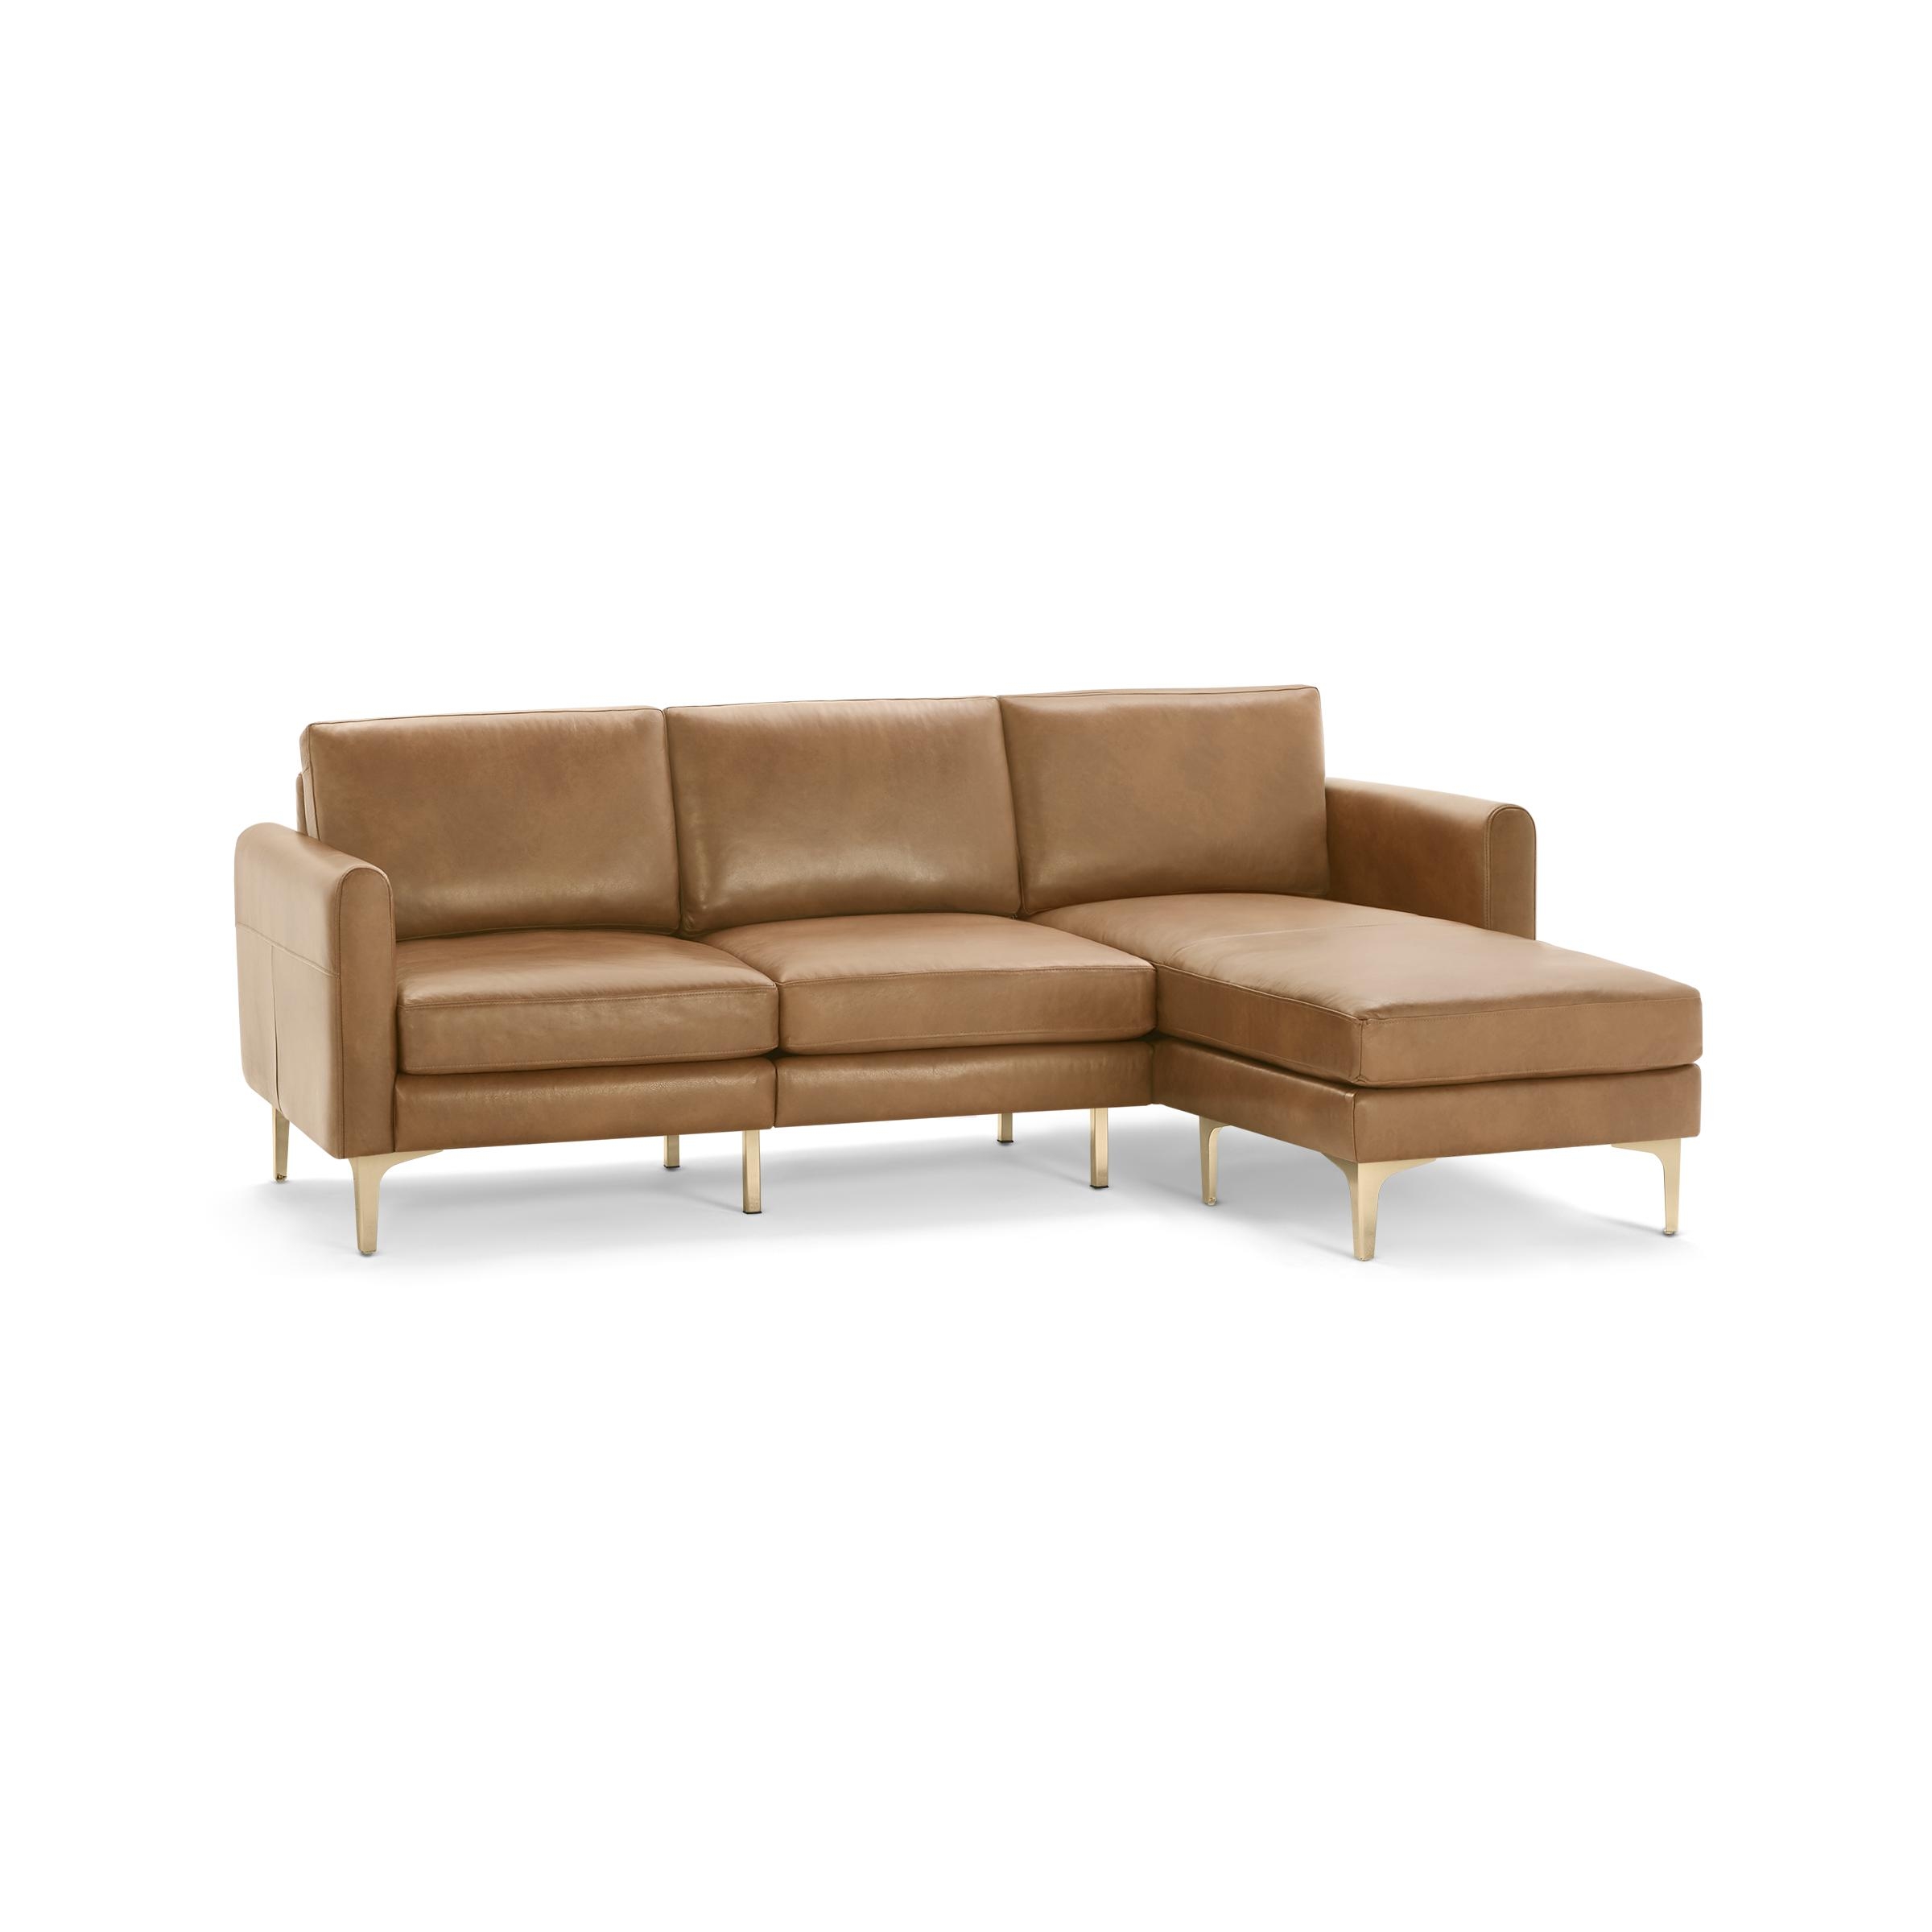 Nomad Leather Sectional in Camel, Brass Legs - Image 0